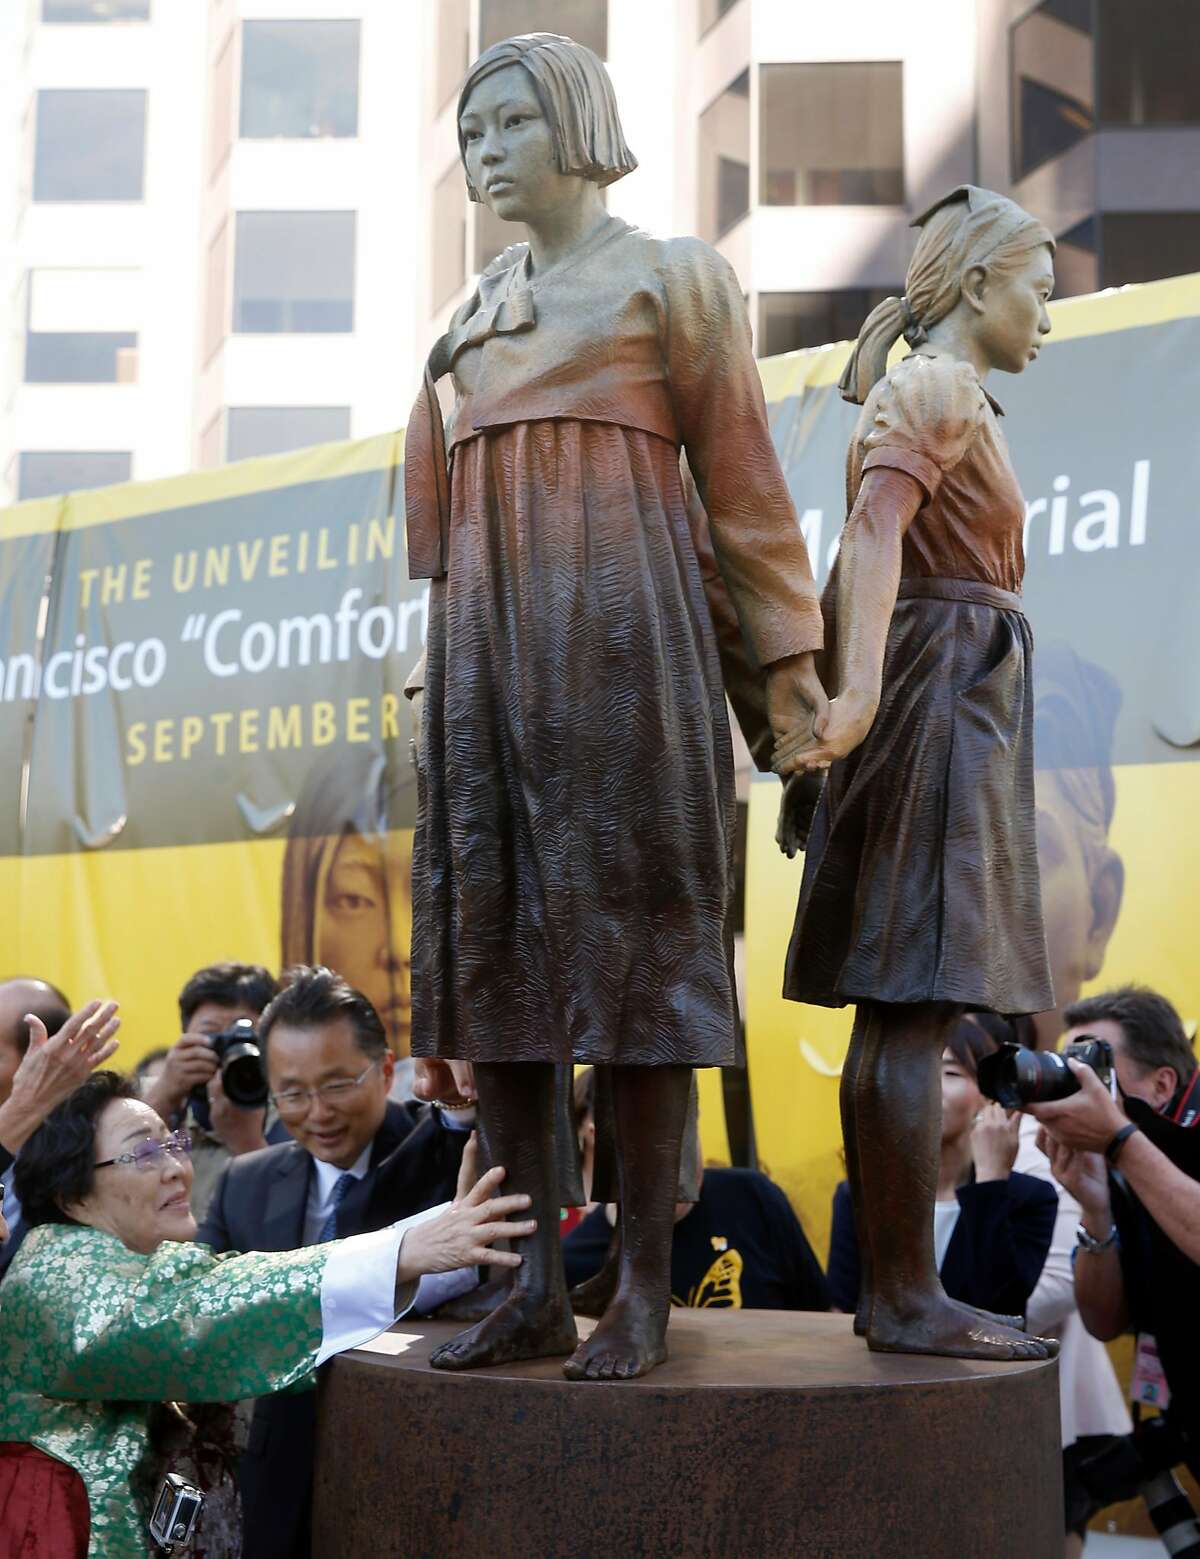 Former "comfort woman" Grandma Yong-soo Lee reaches out to touch the Comfort Women Memorial statue after it's unveiled at St. Mary's Square park in Chinatown in San Francisco, Calif. on Friday, Sept. 22, 2017. During World War II, thousands of women were captured and used as sex slaves by the Japanese military.